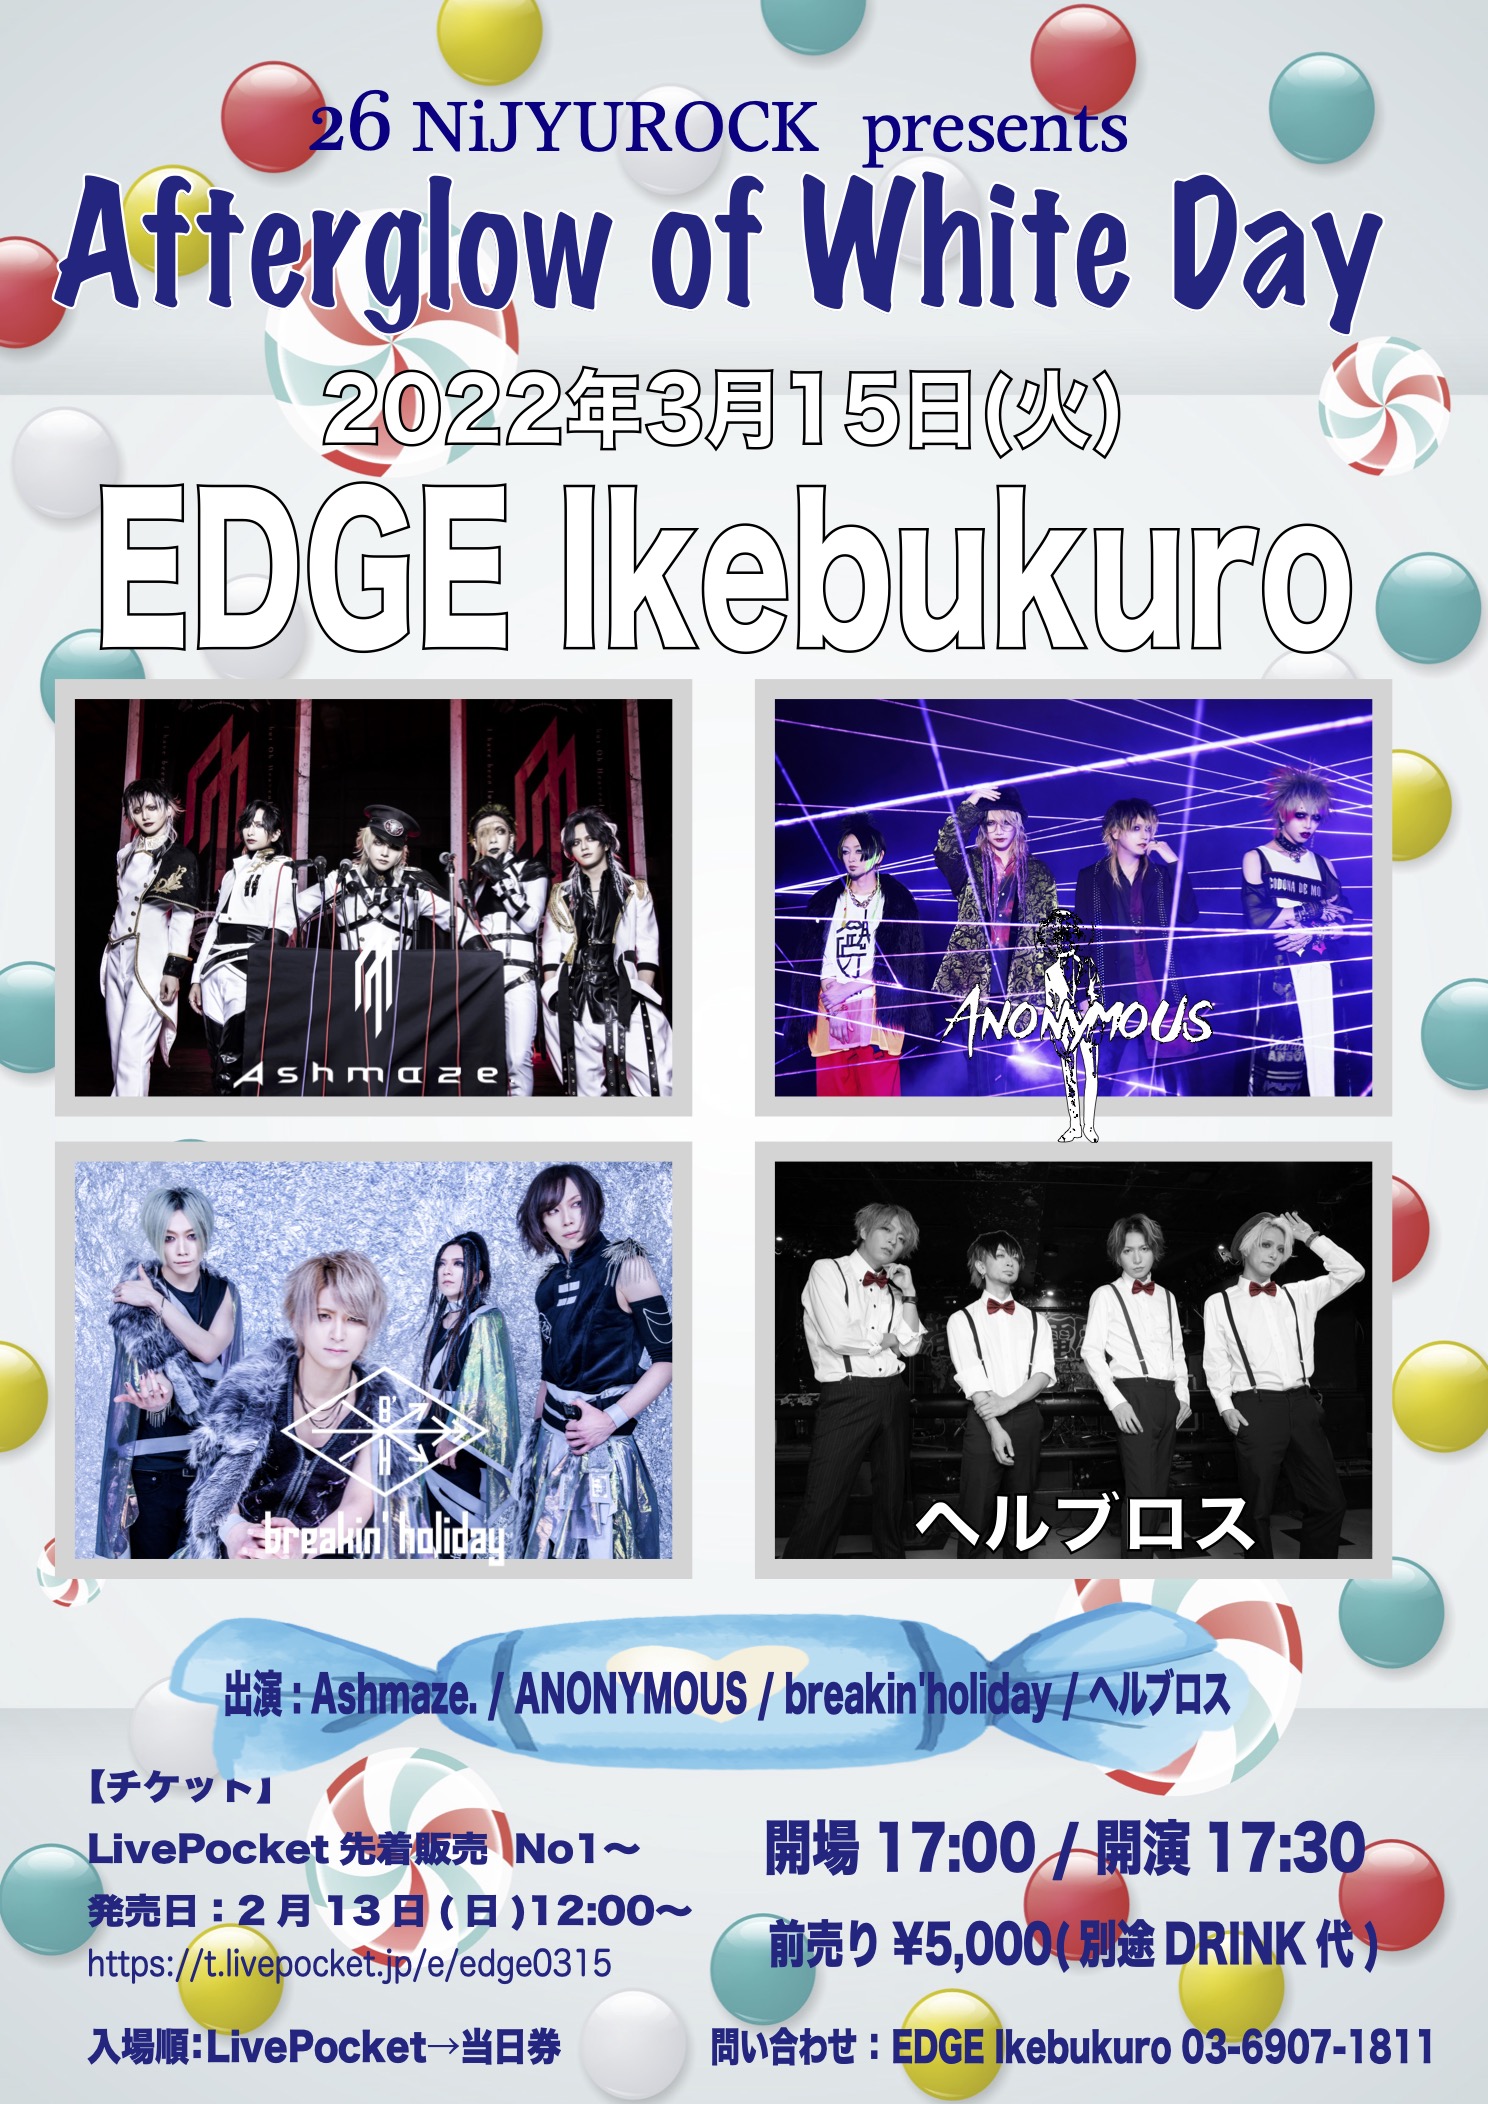 26 NiJYUROCK presents Afterglow of White Day